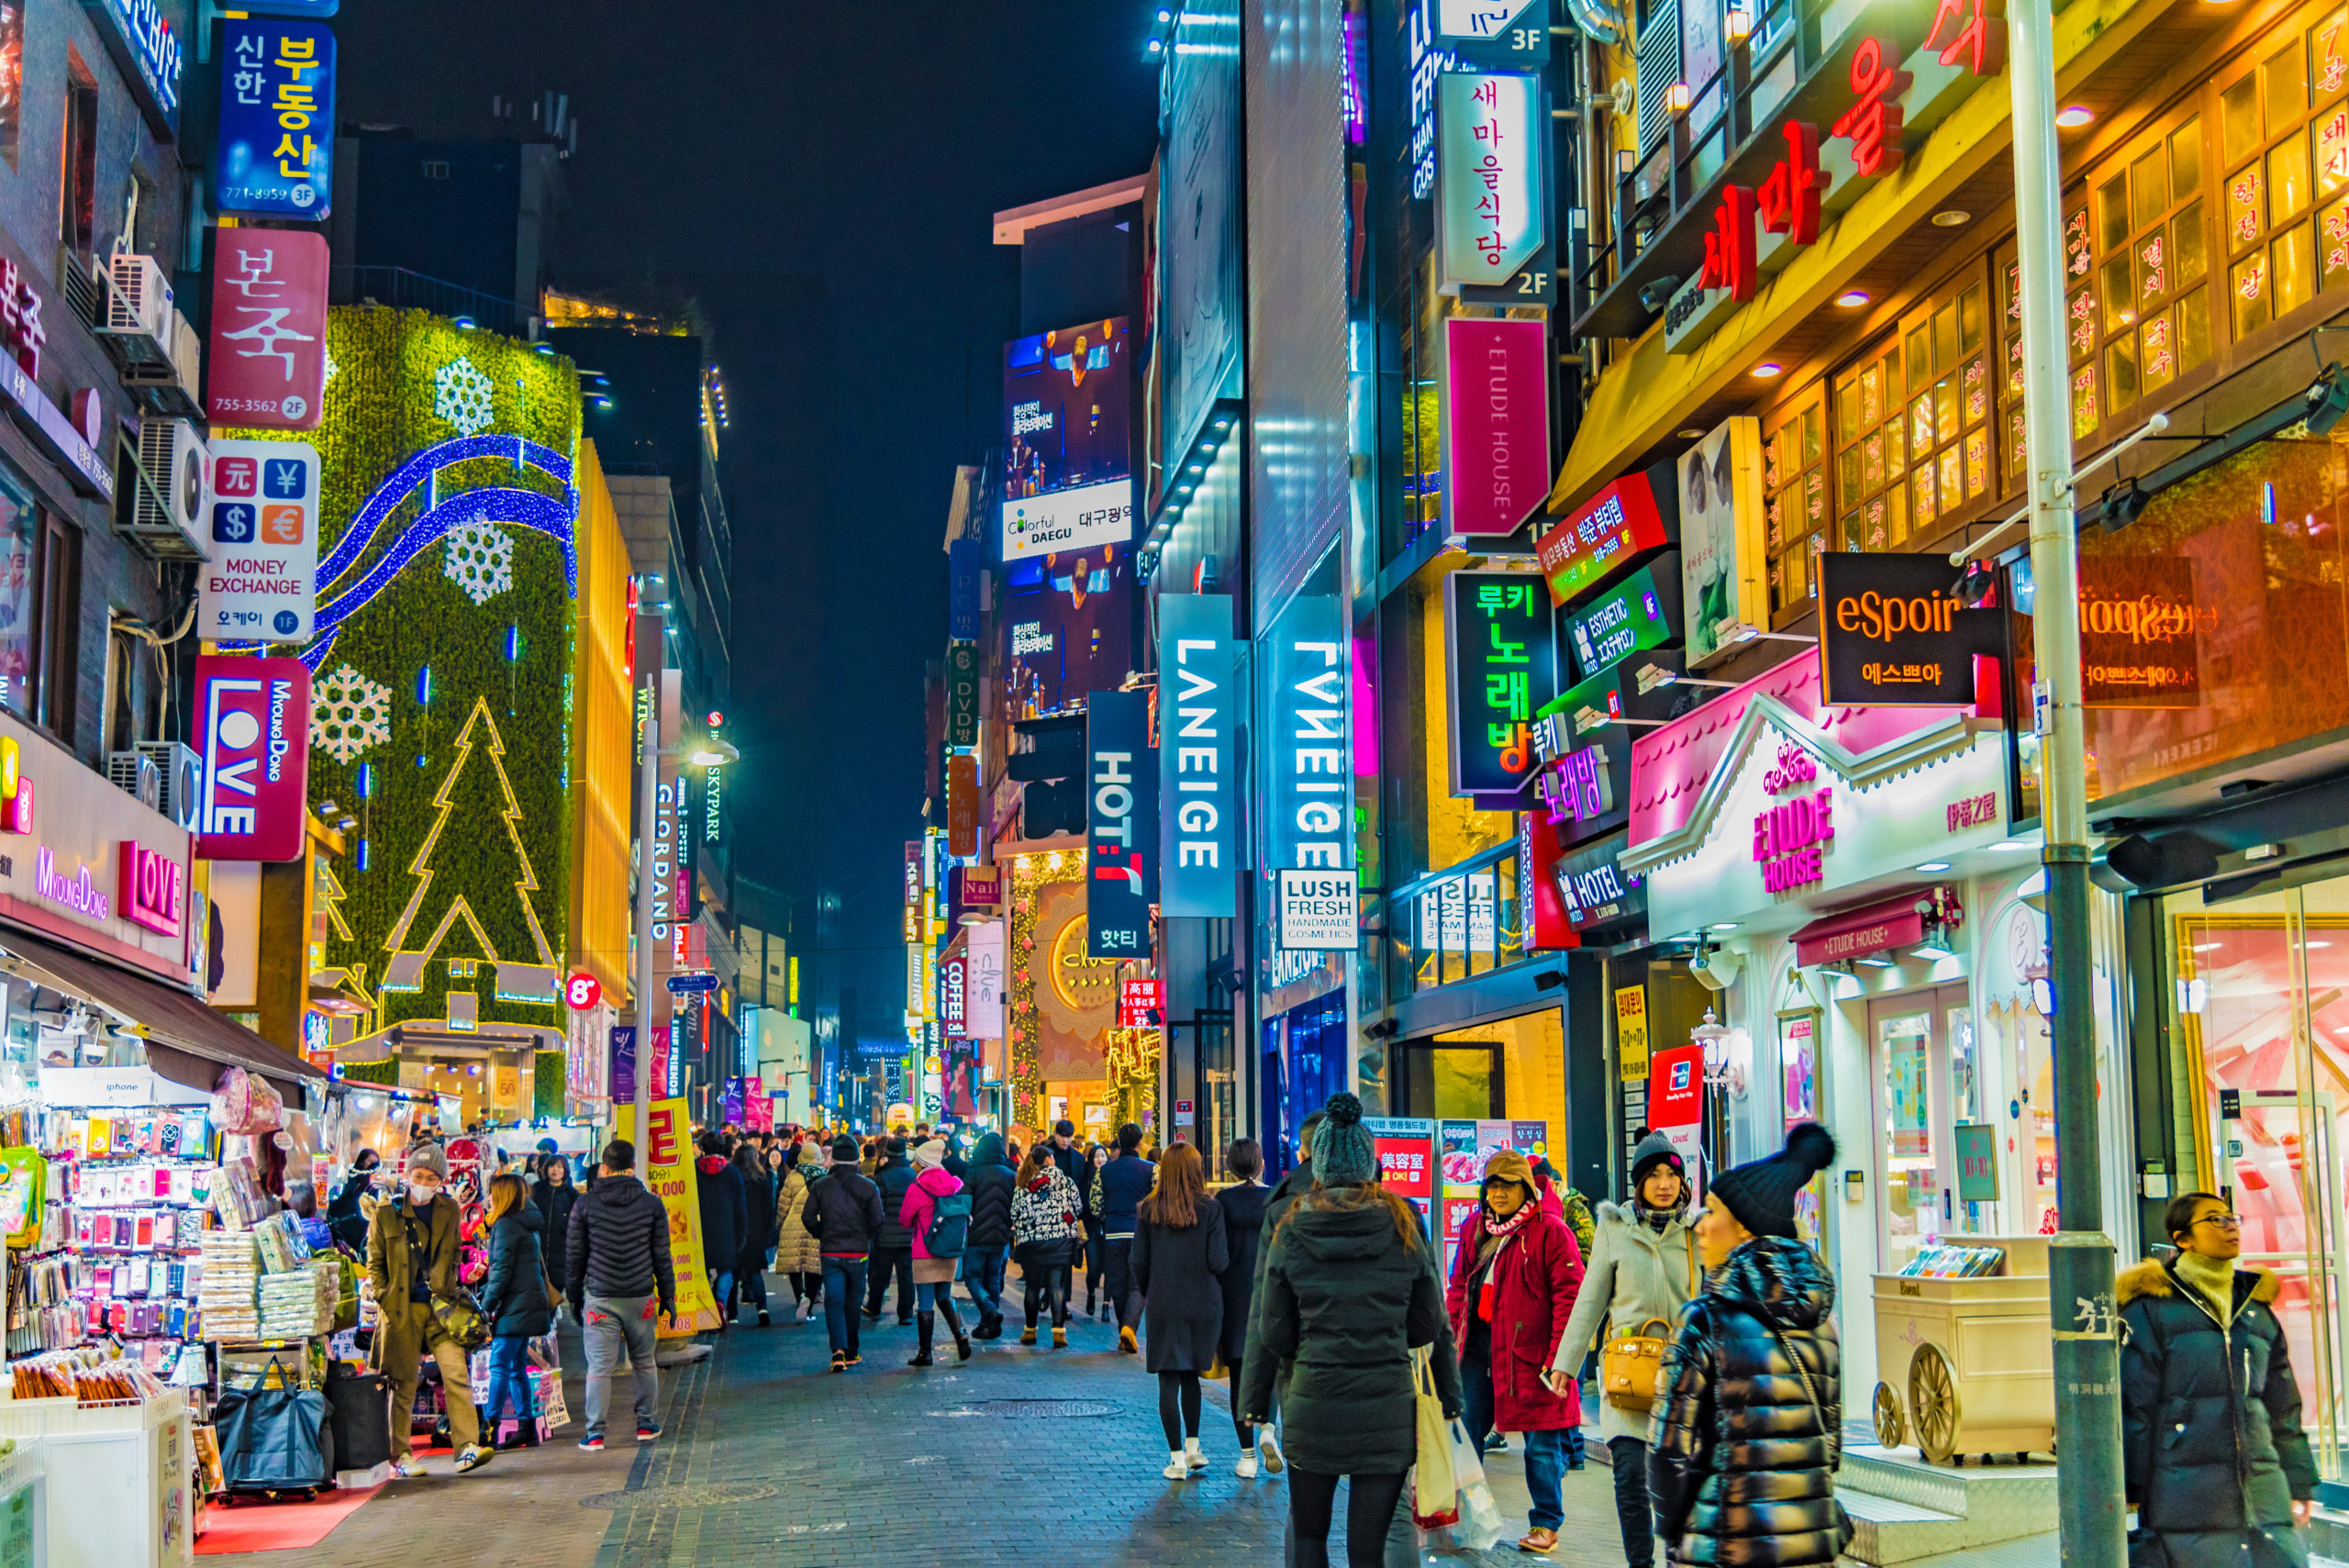 An American’s South Korean Business Trip: A Nightlife Guide